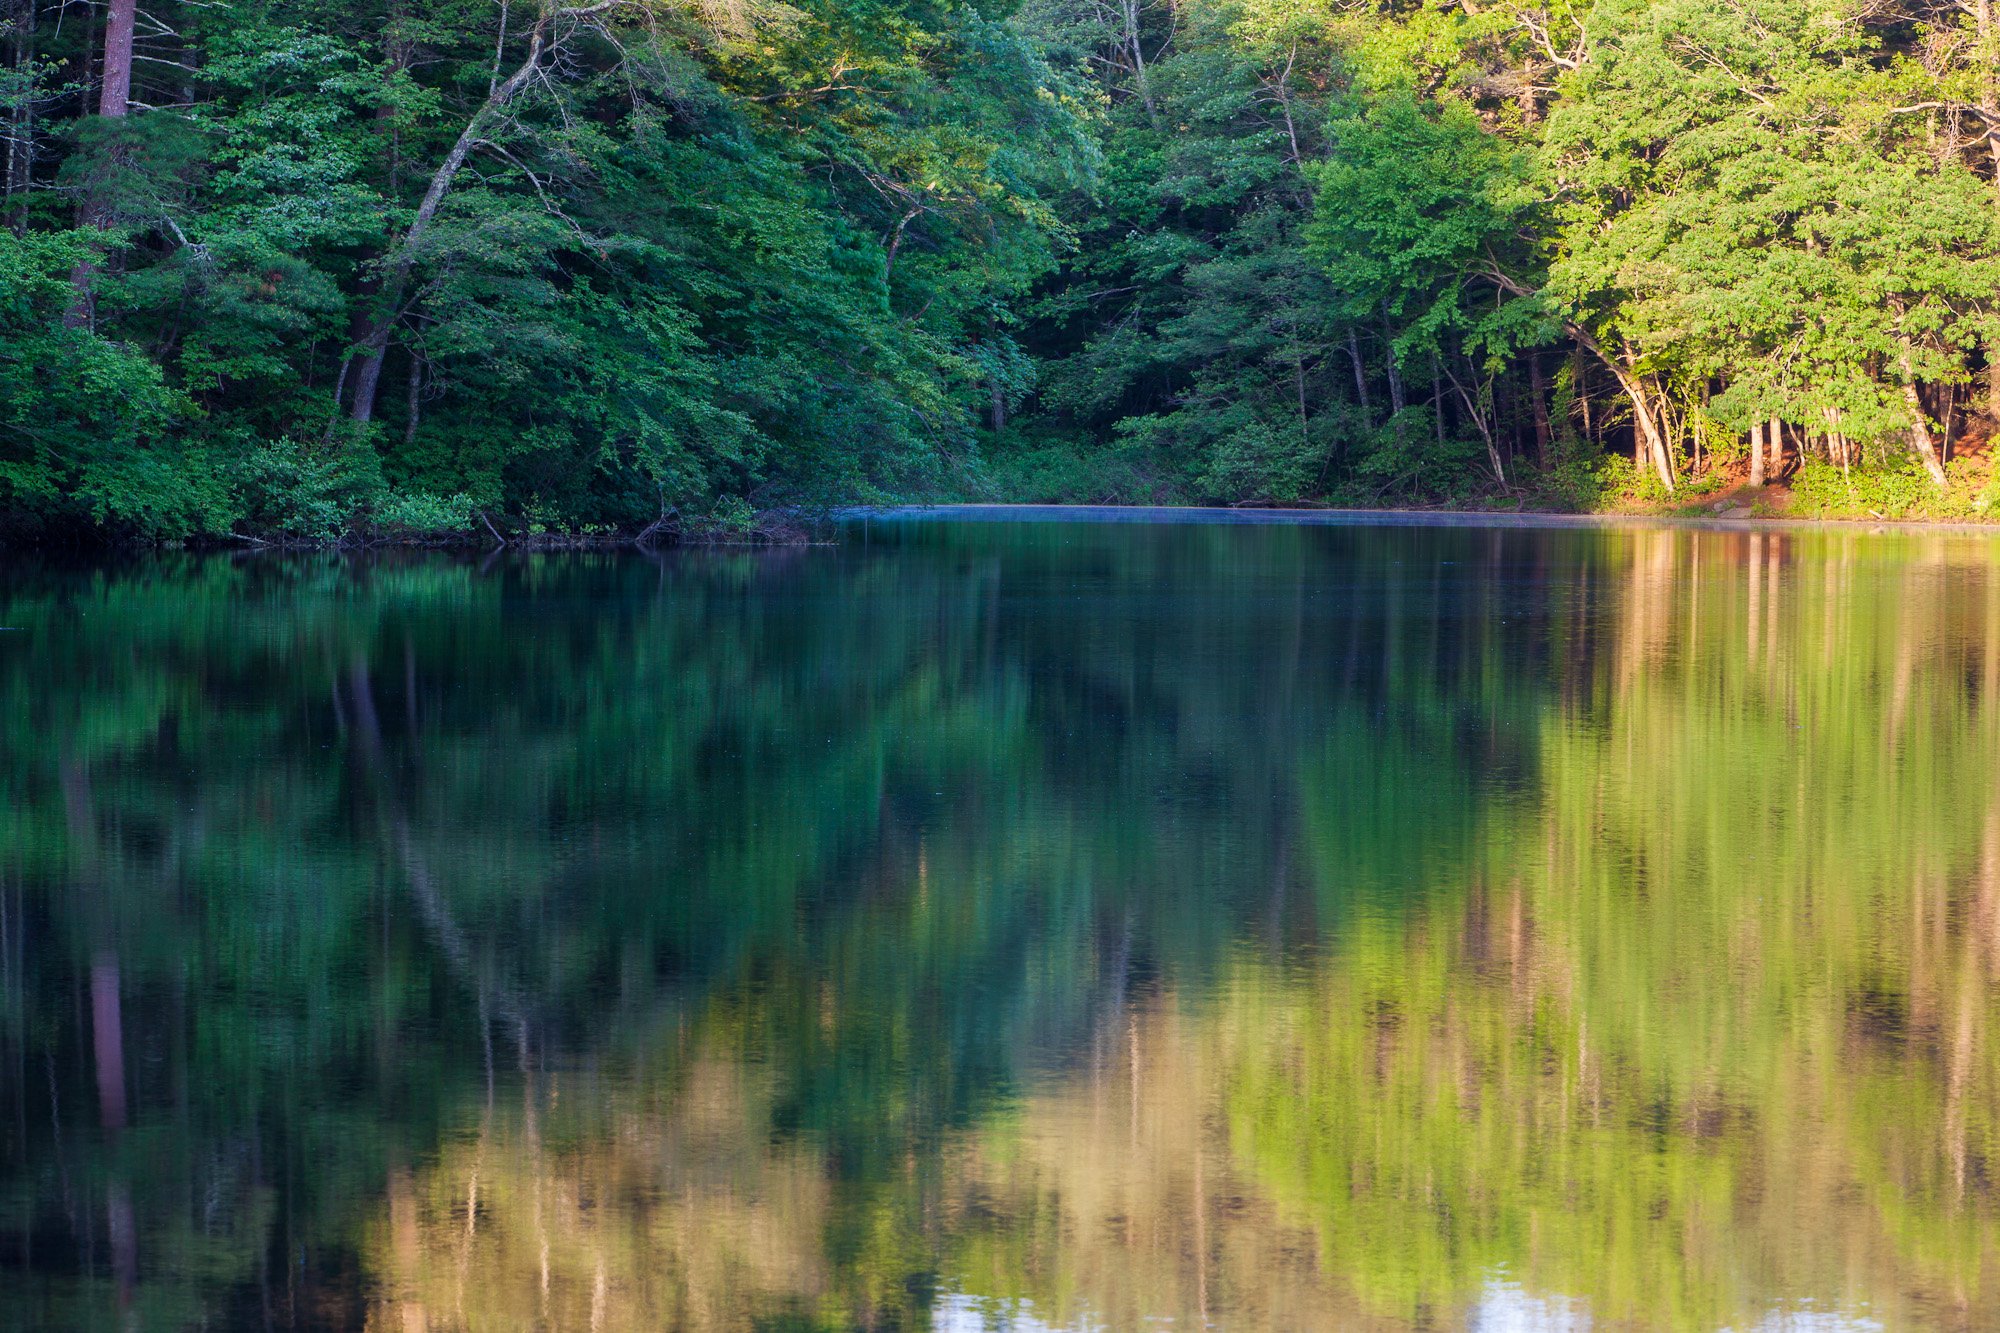  Morning reflections in a pond at the O.W. Stewart Preserve in Kingston, Massachusetts. 